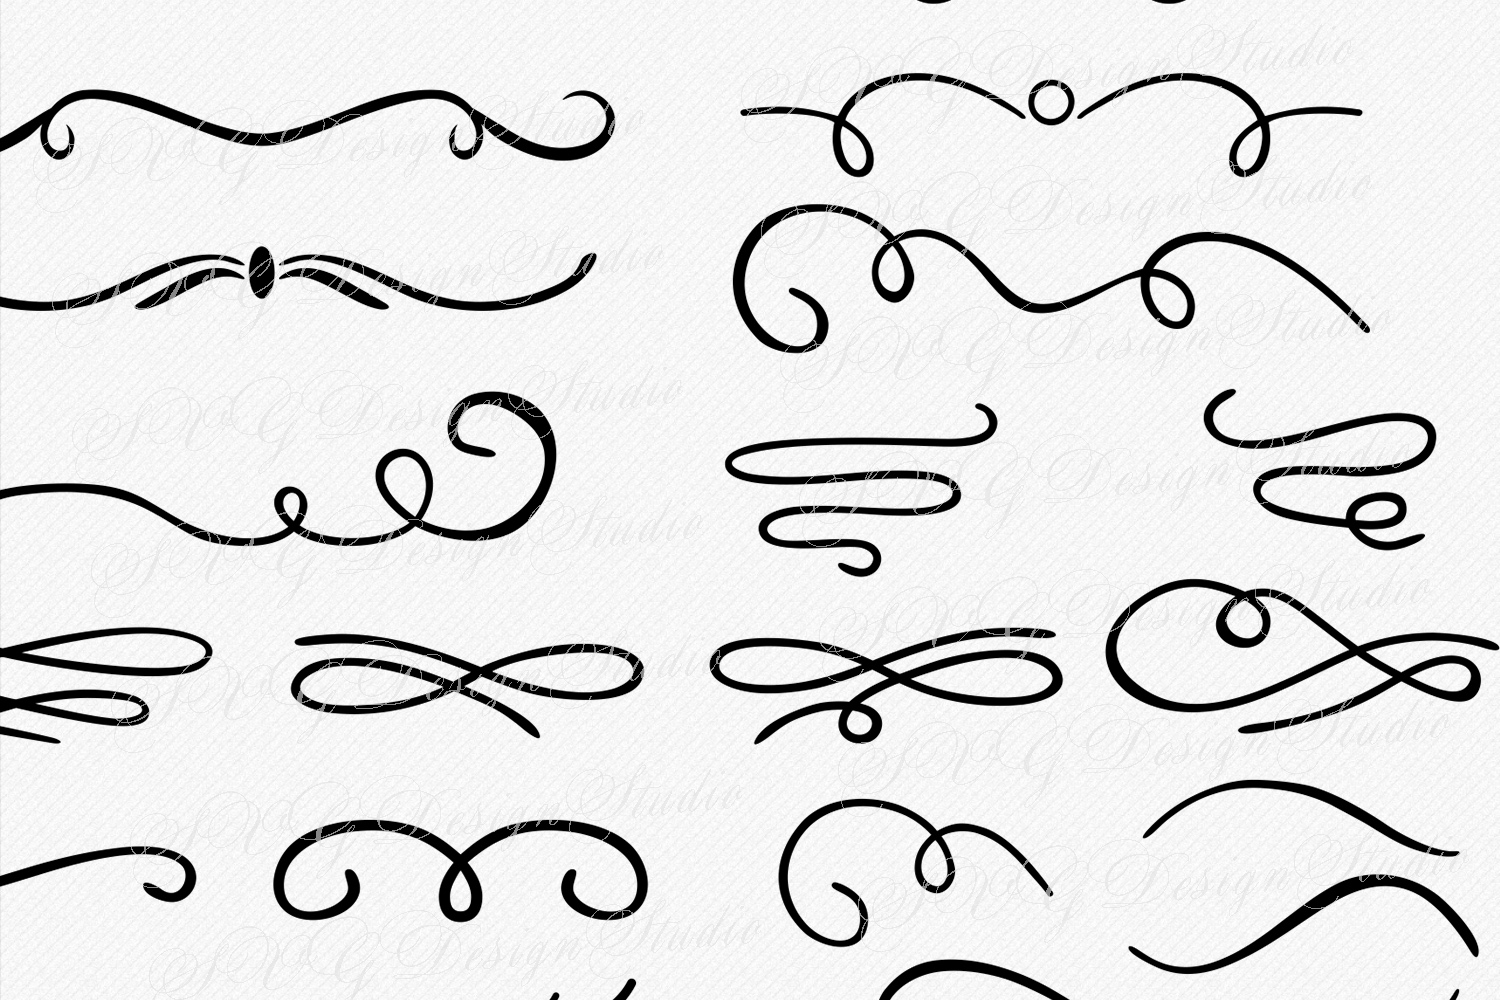 Download 47 Text Dividers vector, Borders SVG - Swirls svg (197925 ...